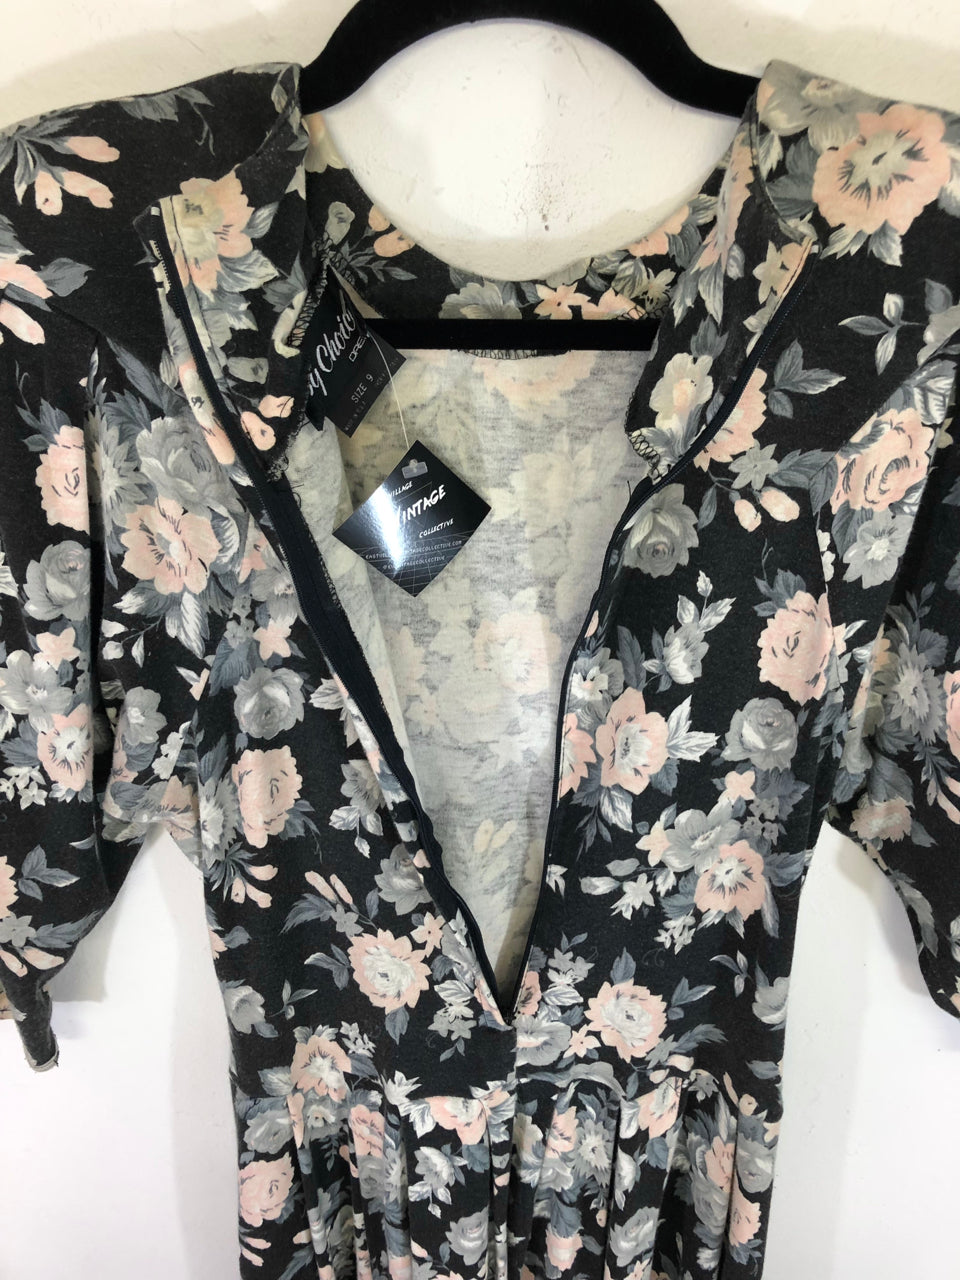 By Choice Floral Dress